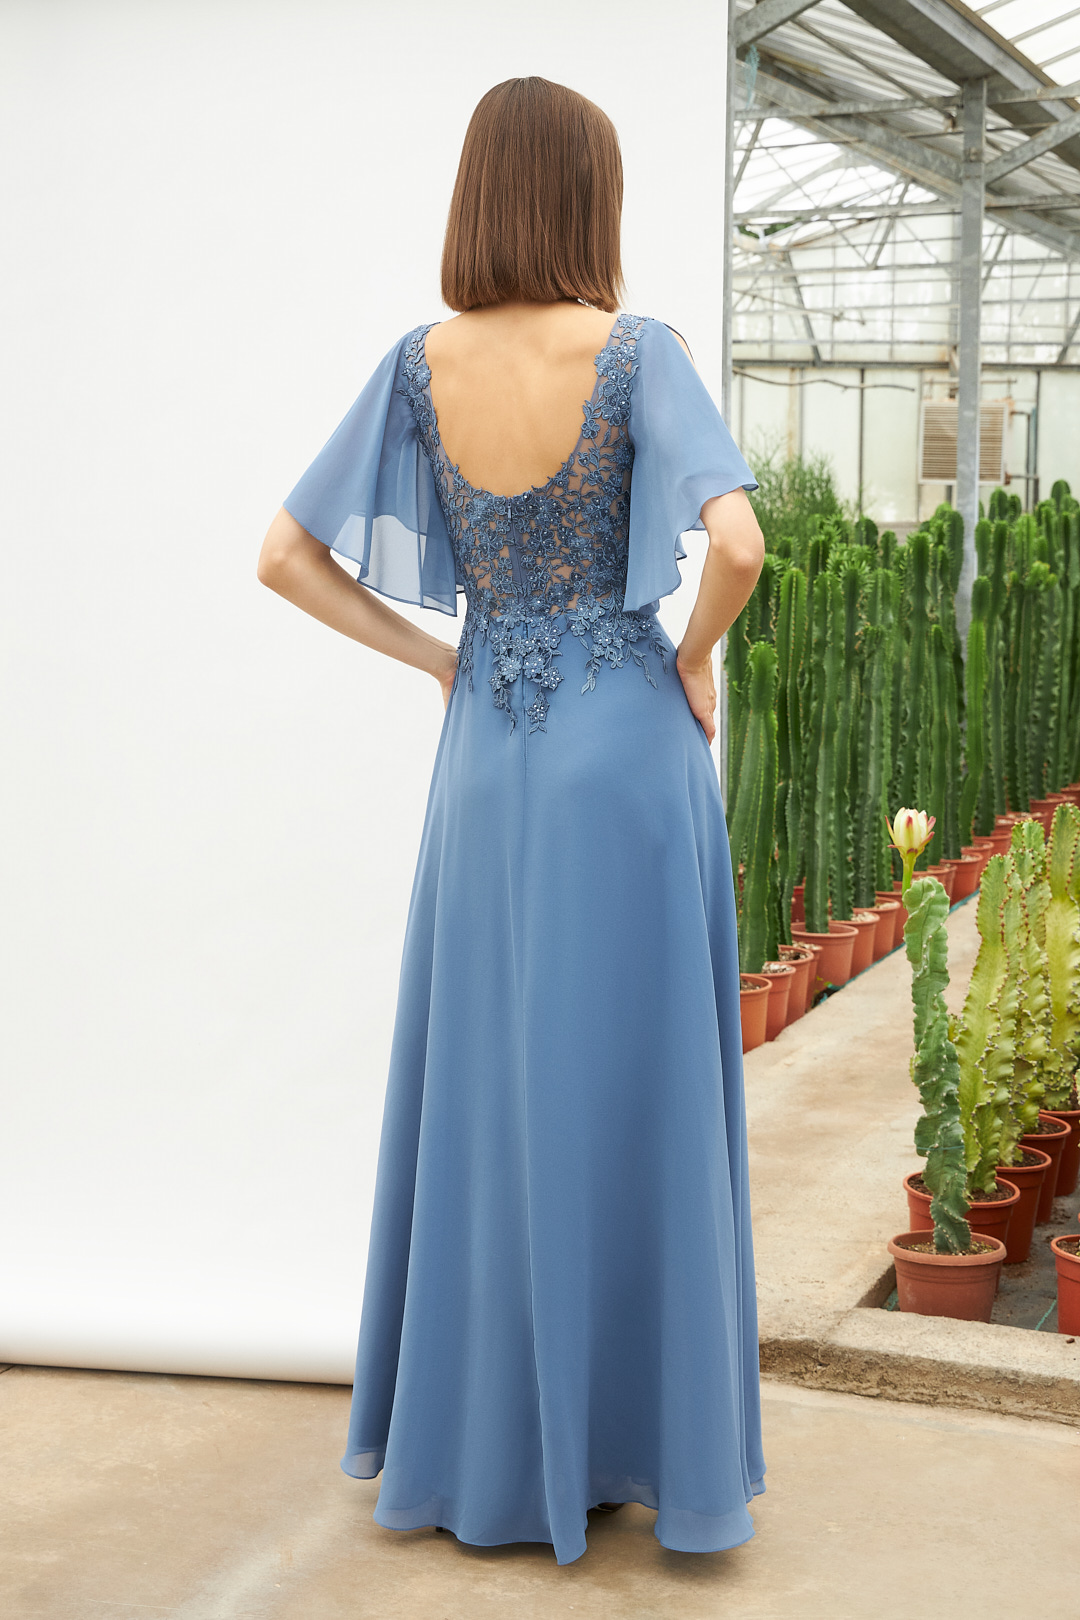 Classic Dresses / Long classic chiffon dress with lace and beaded top and short sleeves